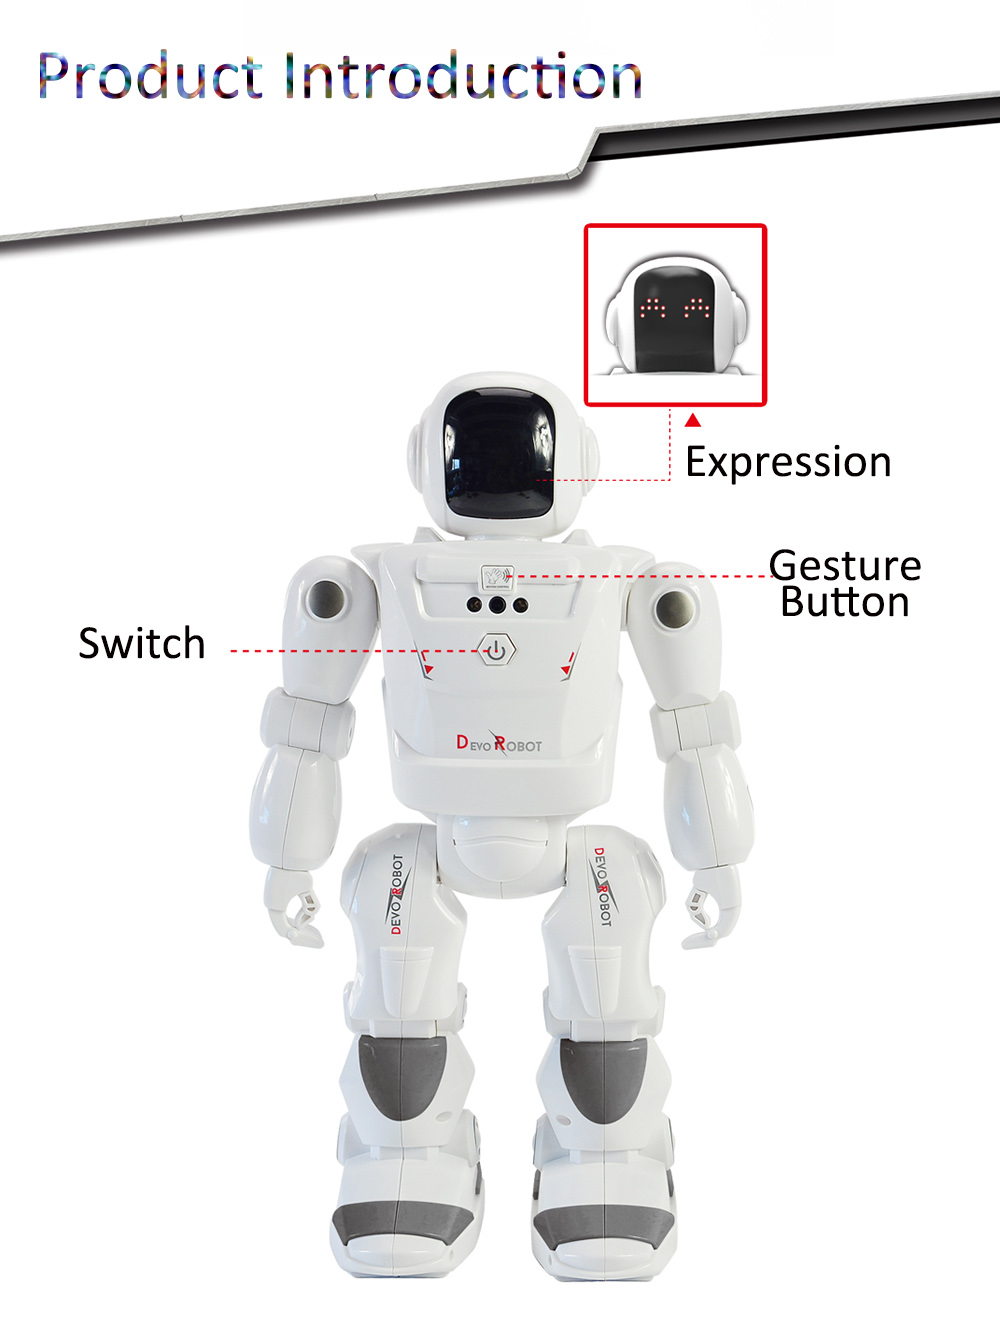 DEVO-Robot-Smart-RC-Robot-Programmable-Infrared-Gesture-Control-Dance-LED-Expression-Robot-Toy-1412907